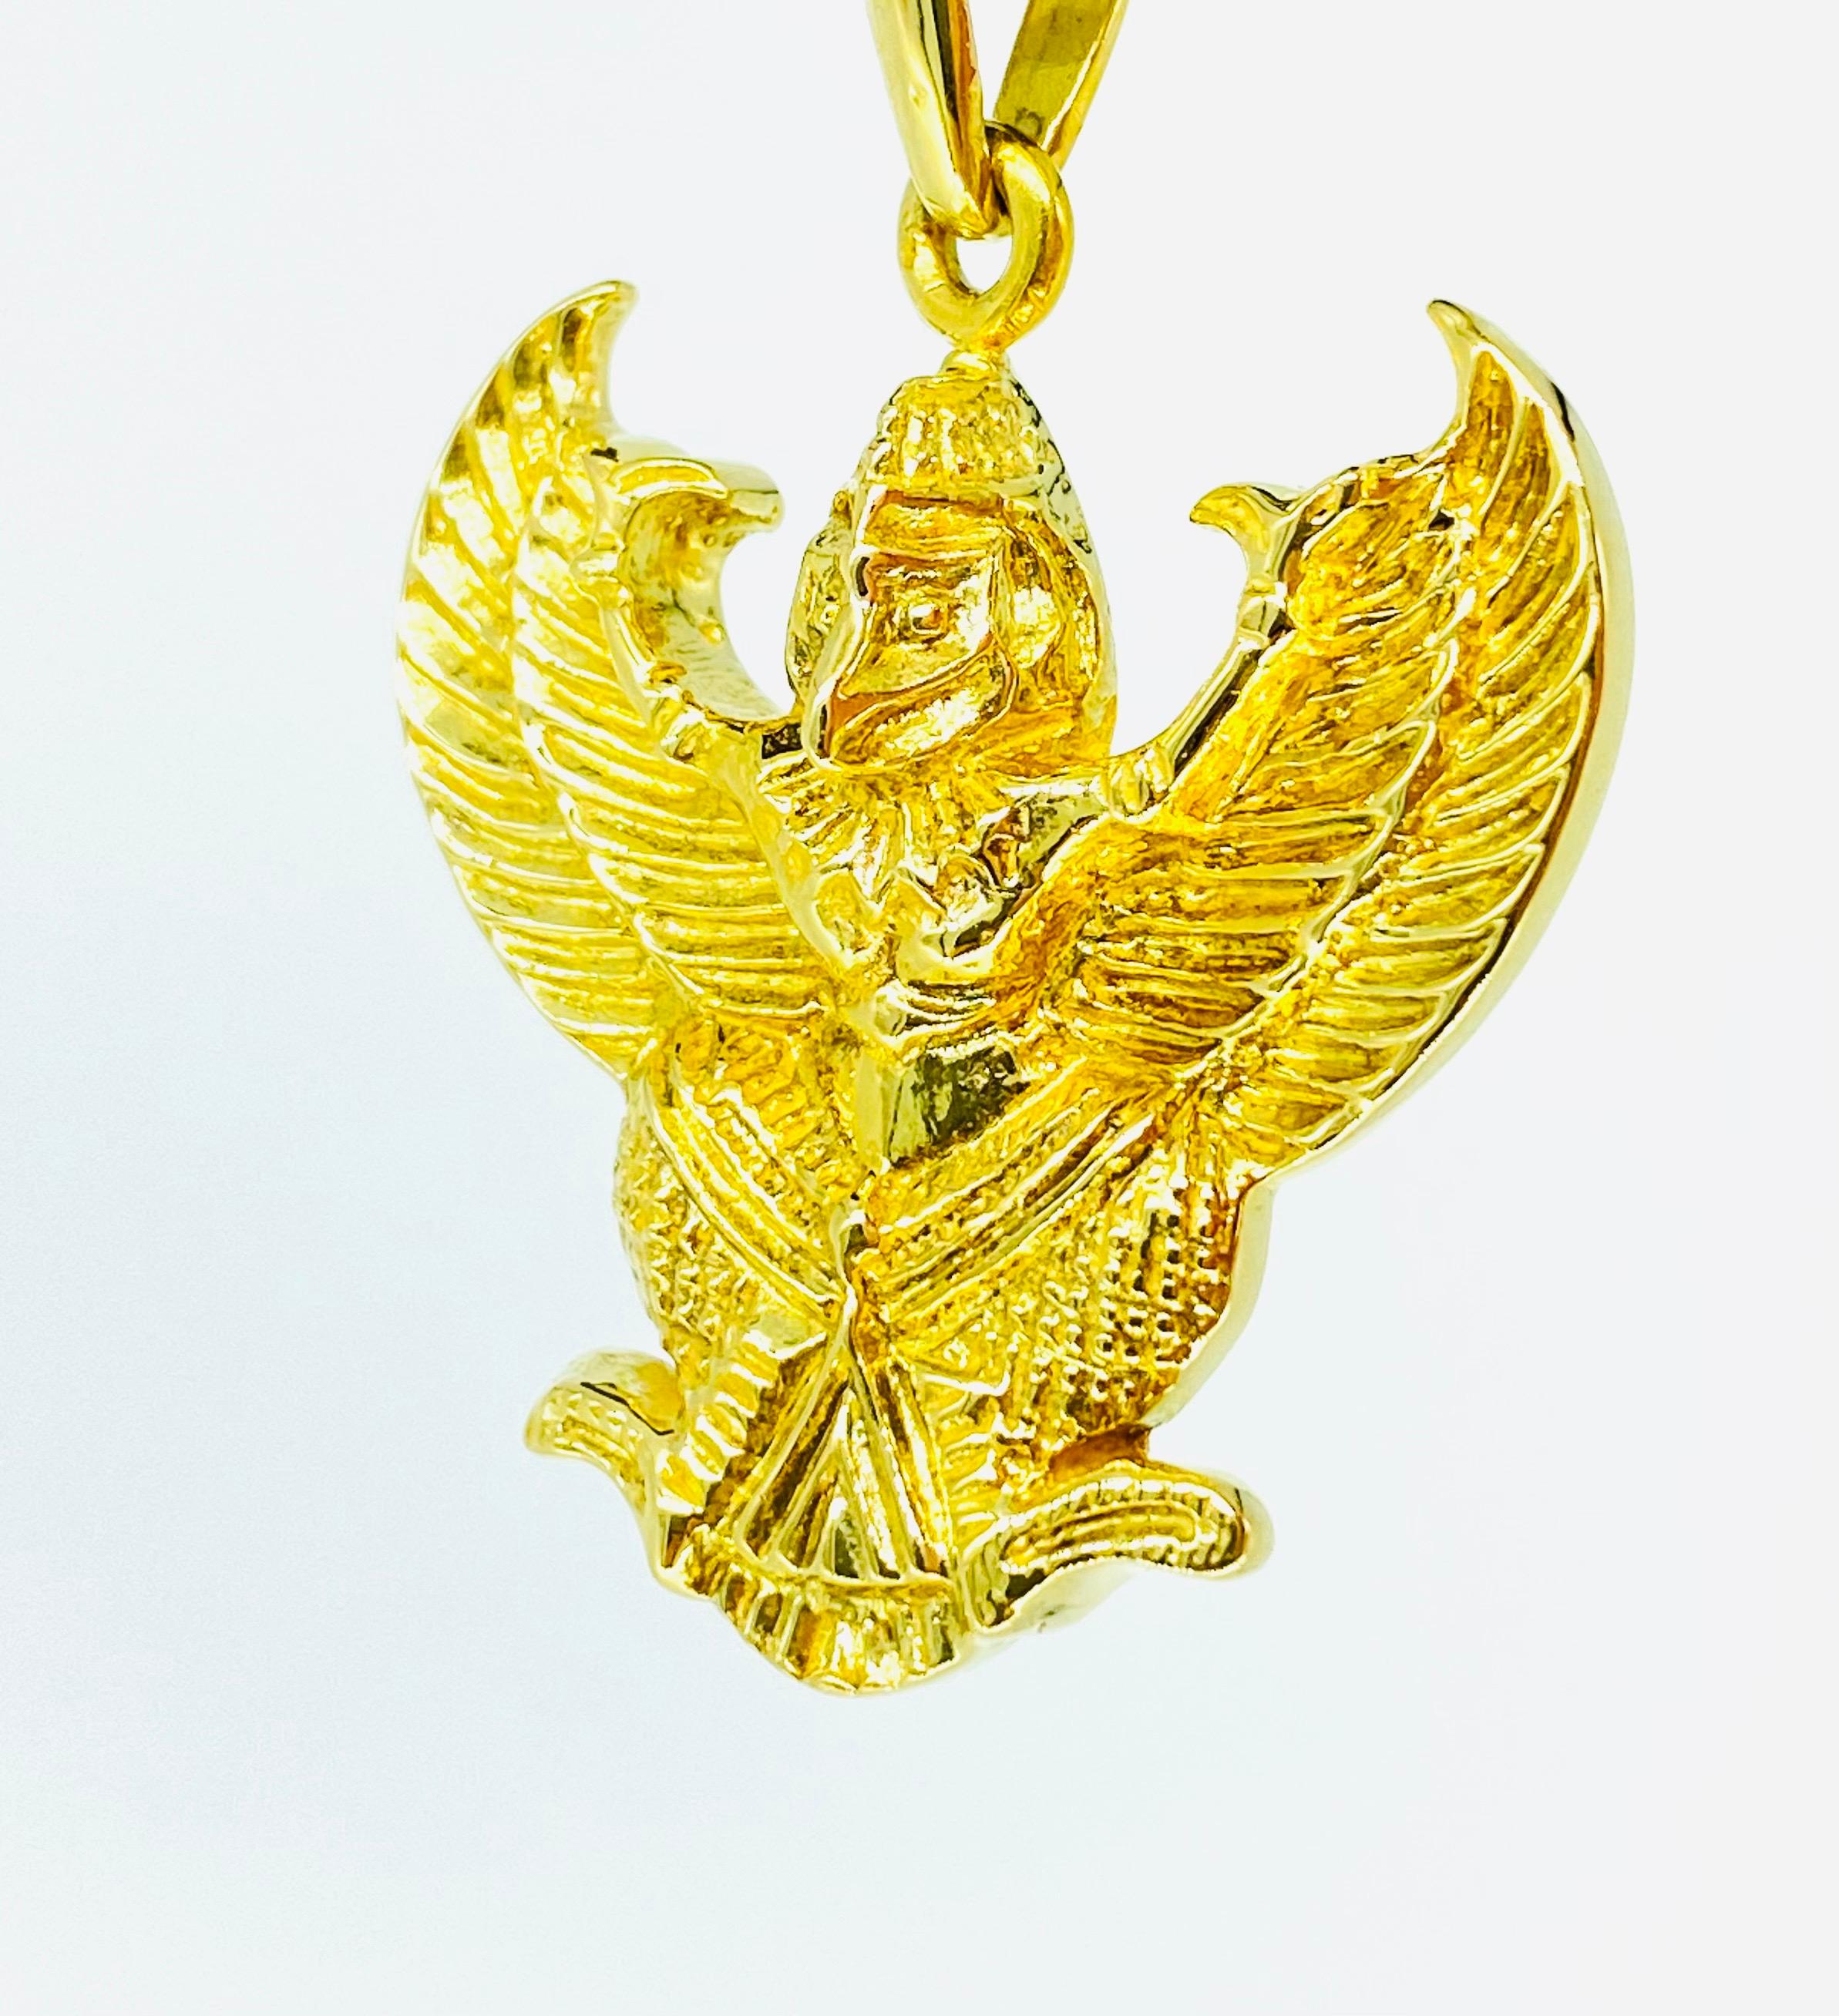 Vintage Egyptian Horus Eagle Pendant Heavy Solid Gold 18 Karat. Very detailed craftsmanship on this very unique pendant. The pendant measures 31.5mm X 35mm (without bail) and weights 22.4 grams solid 18k gold. Very rare detailed work by designer.